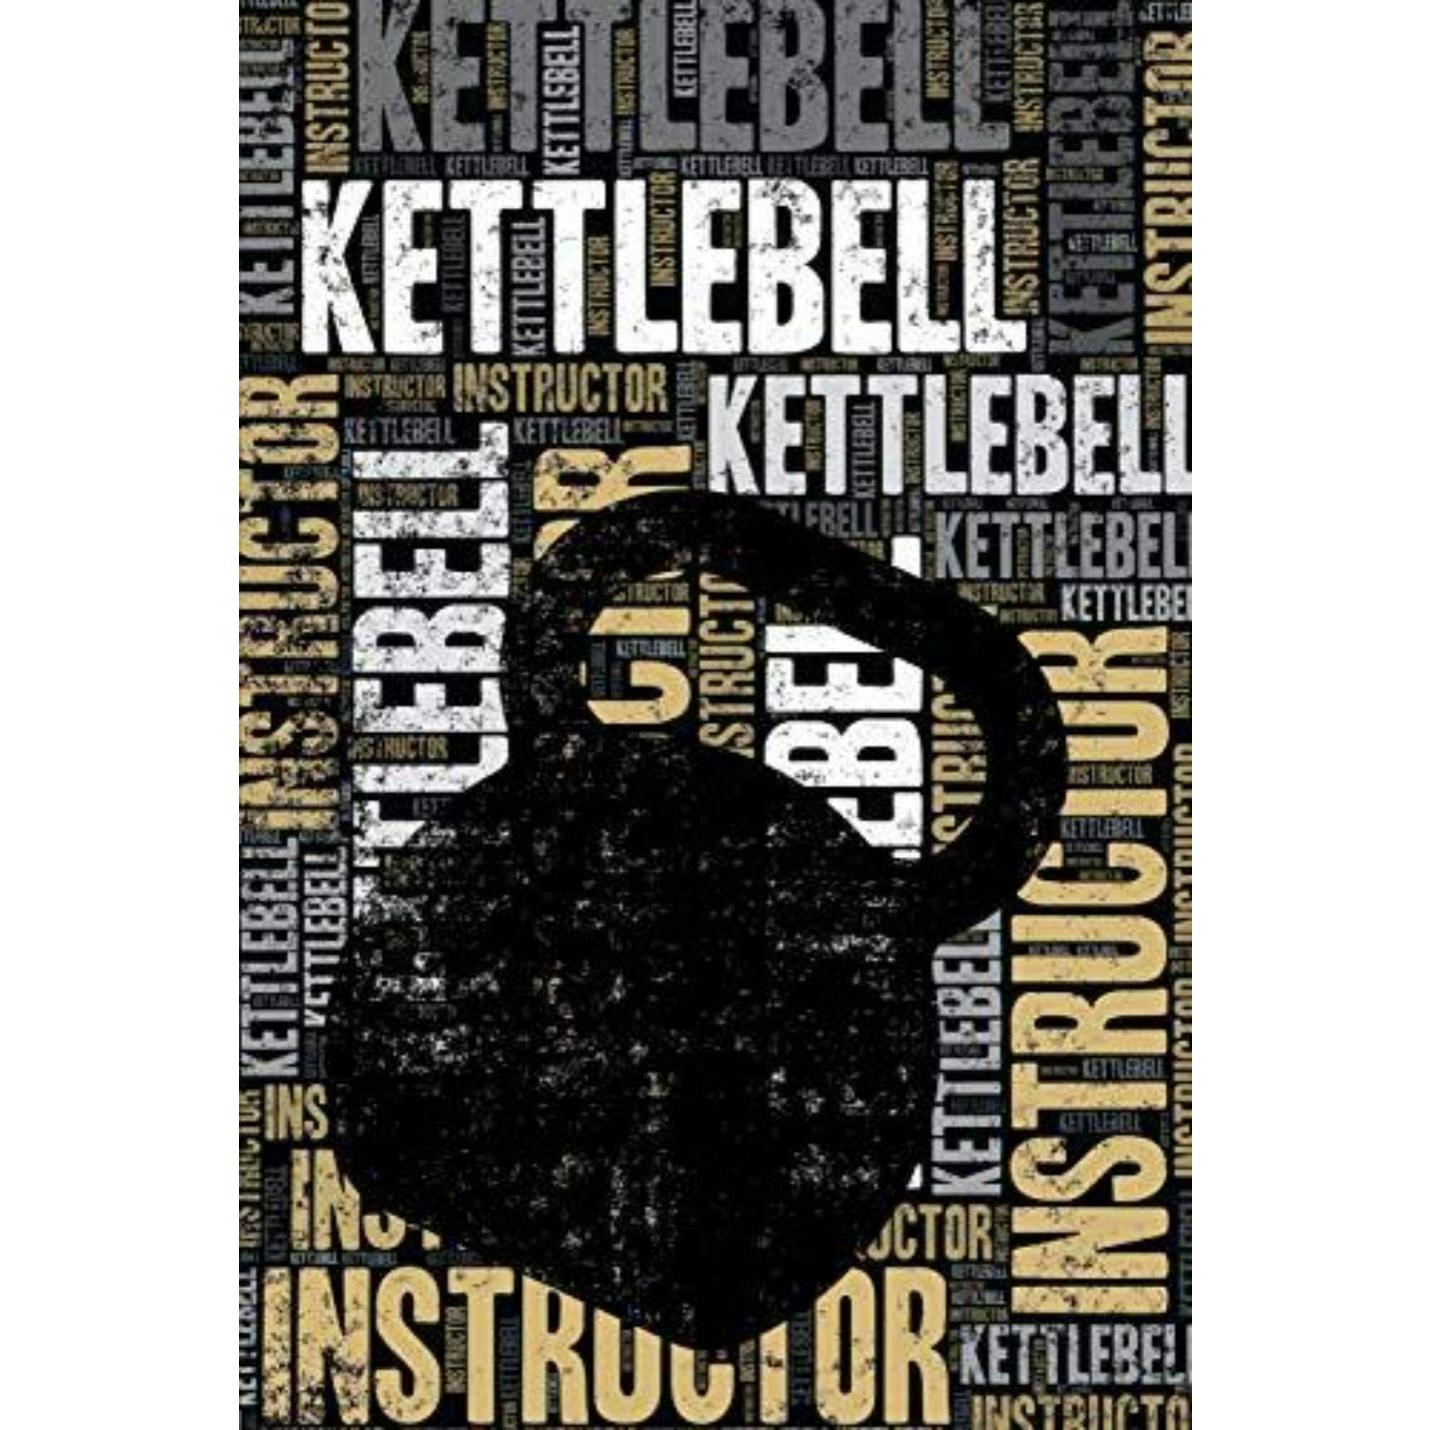 Kettlebell Instructor Journal: Cool Blank Lined Kettlebell Lovers Notebook for Instructor and Practitioner - happygetfit.com